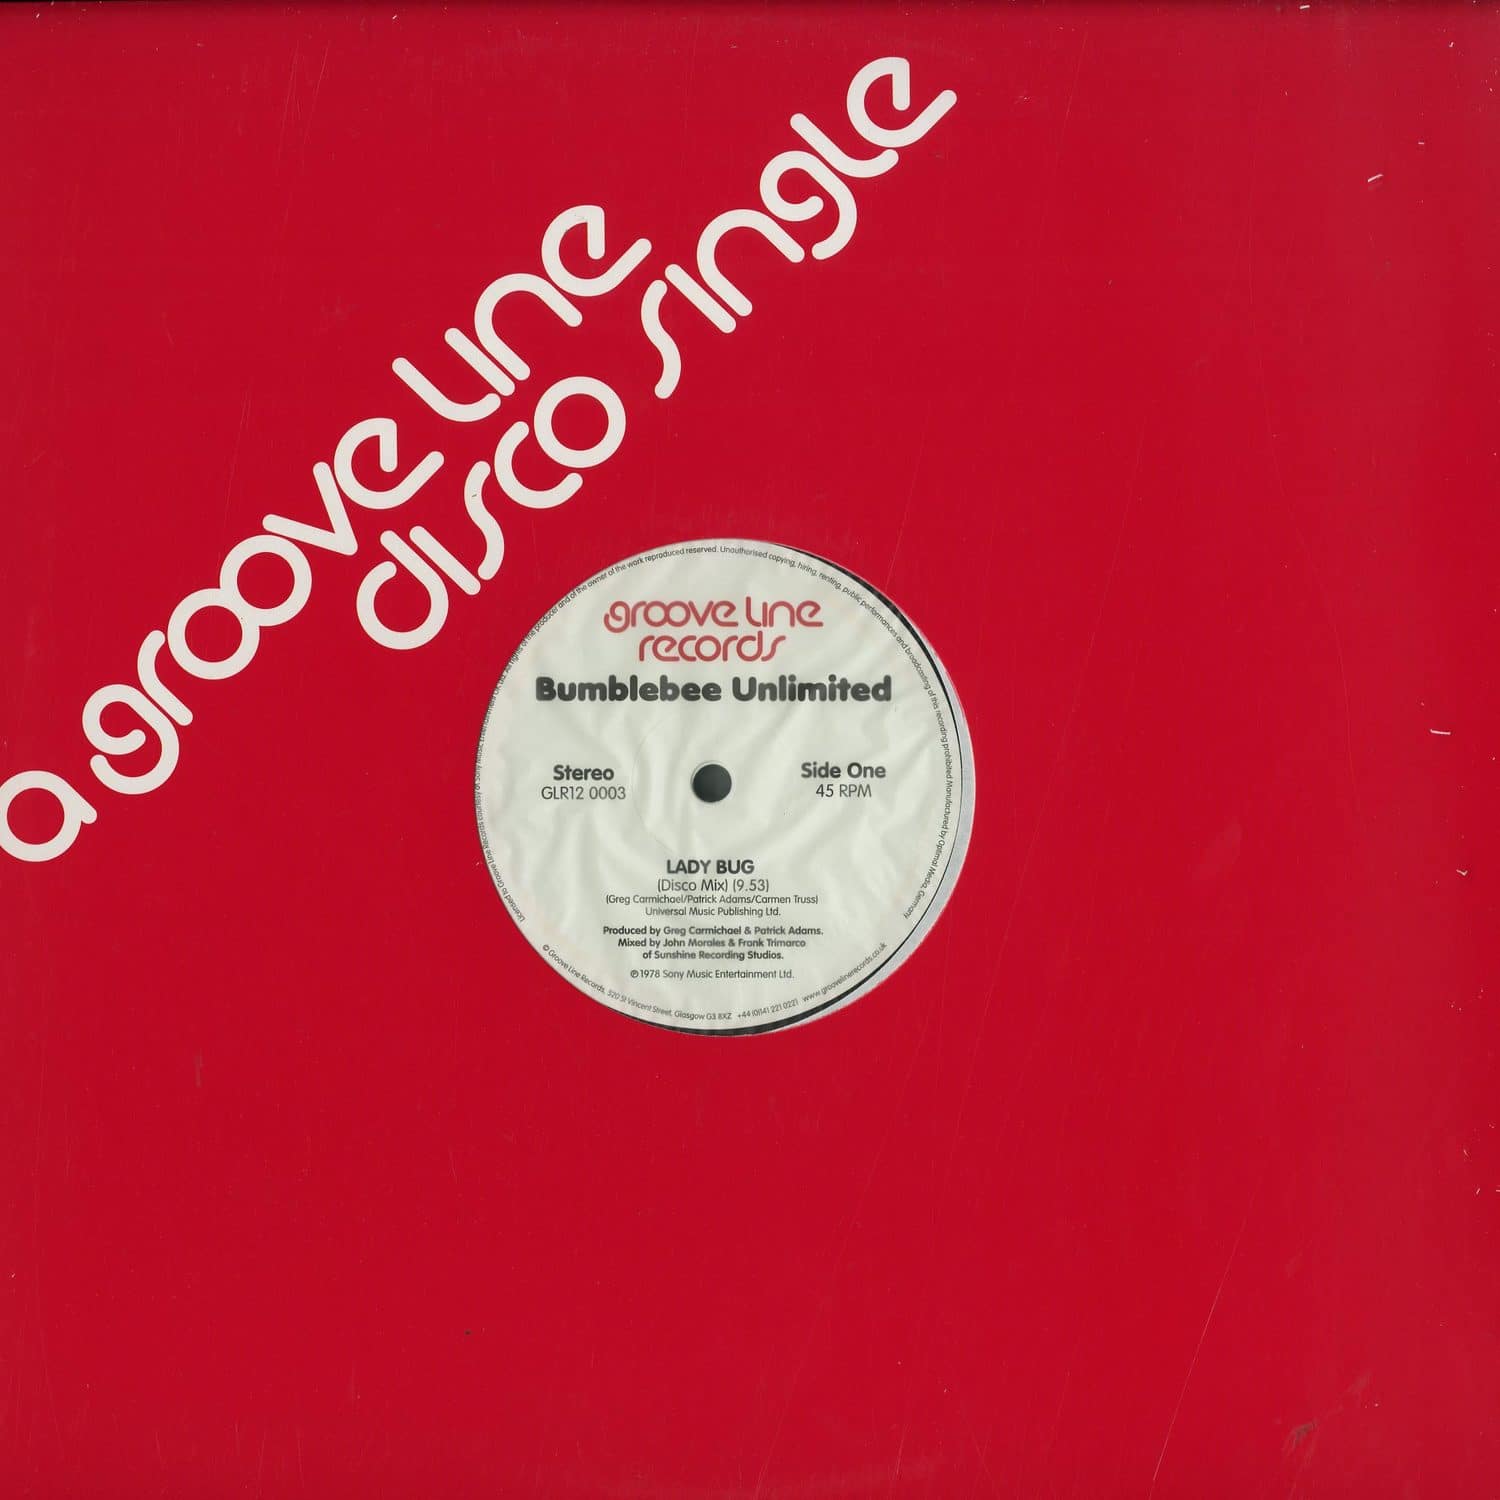 Bumblebee Unlimited - LADY BUG W/ MIXES BY LARRY LEVAN, JOHN MORALES & FRANK TRIMARCO 